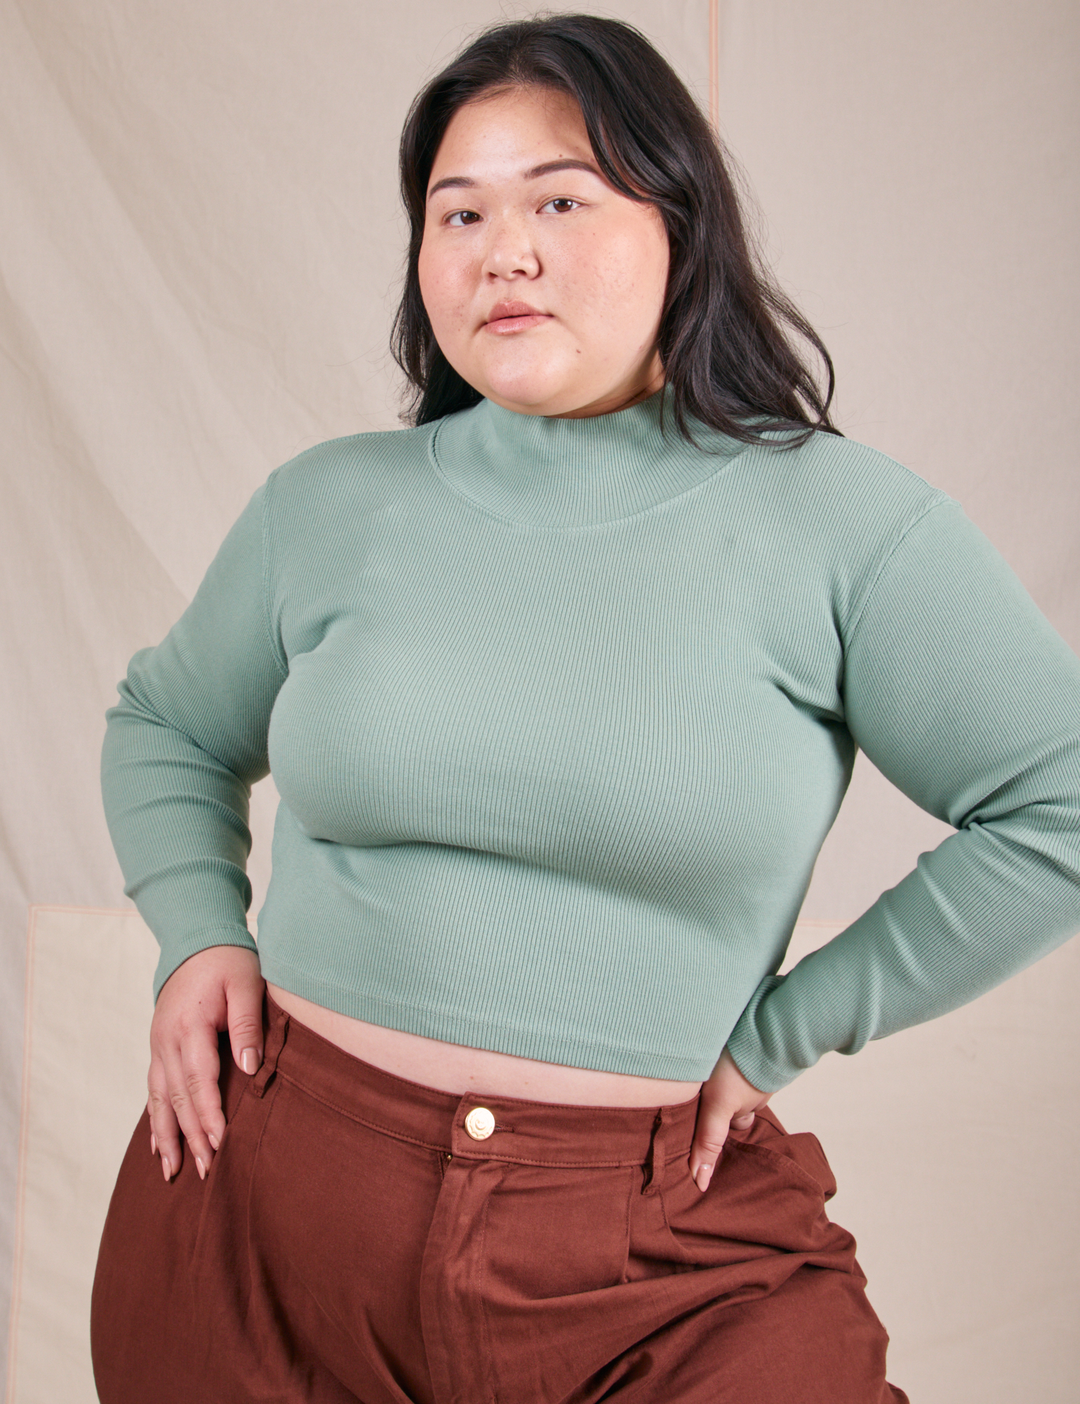 Model is wearing a sage green turtleneck crop sweater and maroon trousers